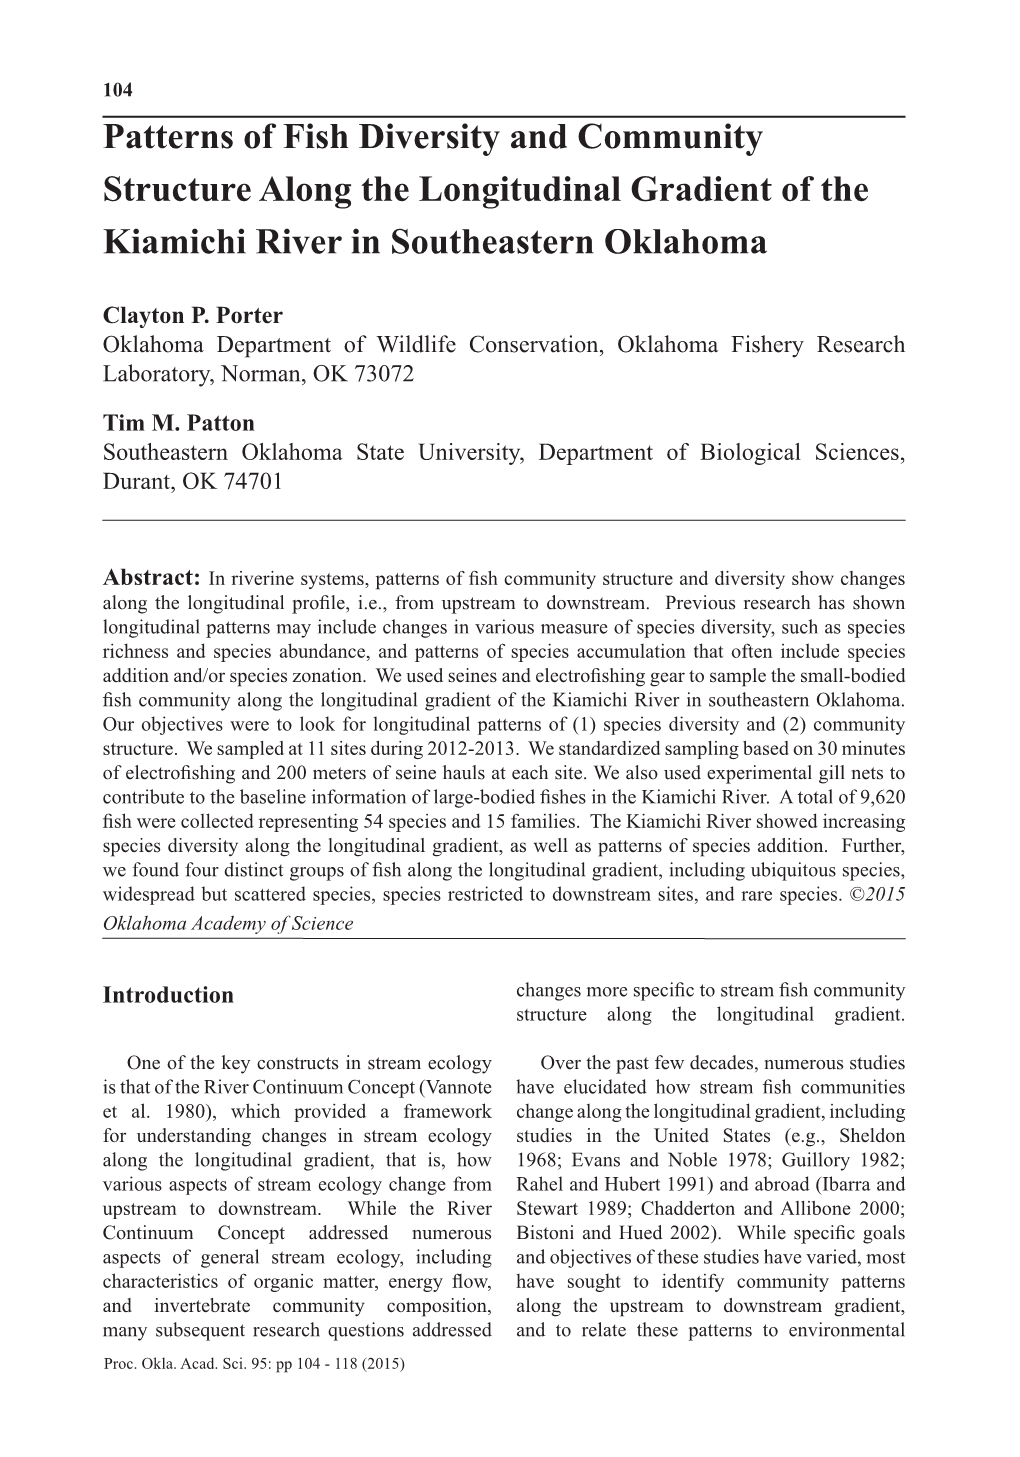 Patterns of Fish Diversity and Community Structure Along the Longitudinal Gradient of the Kiamichi River in Southeastern Oklahoma